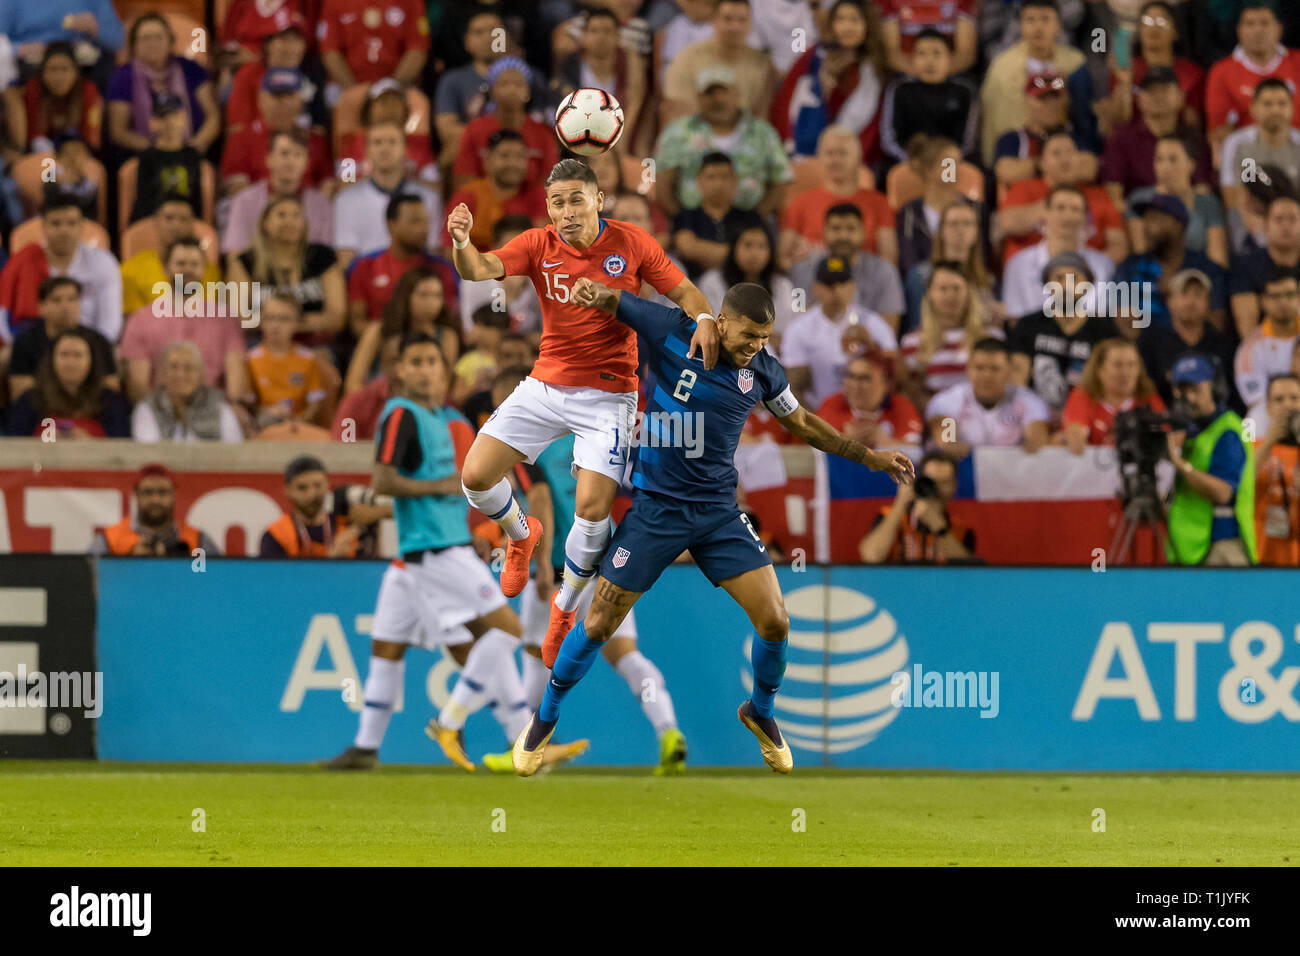 Houston, Texas, USA. 26th Mar 2019. USA defender DeAndre Yedlin (2) and Chile defender Ã®scar Opazo (15) during the second half of the international friendly match between USA and Chile at BBVA Compass Stadium in Houston, Texas The final ends in a tie 1-1 © Maria Lysaker/CSM. Credit: Cal Sport Media/Alamy Live News Stock Photo